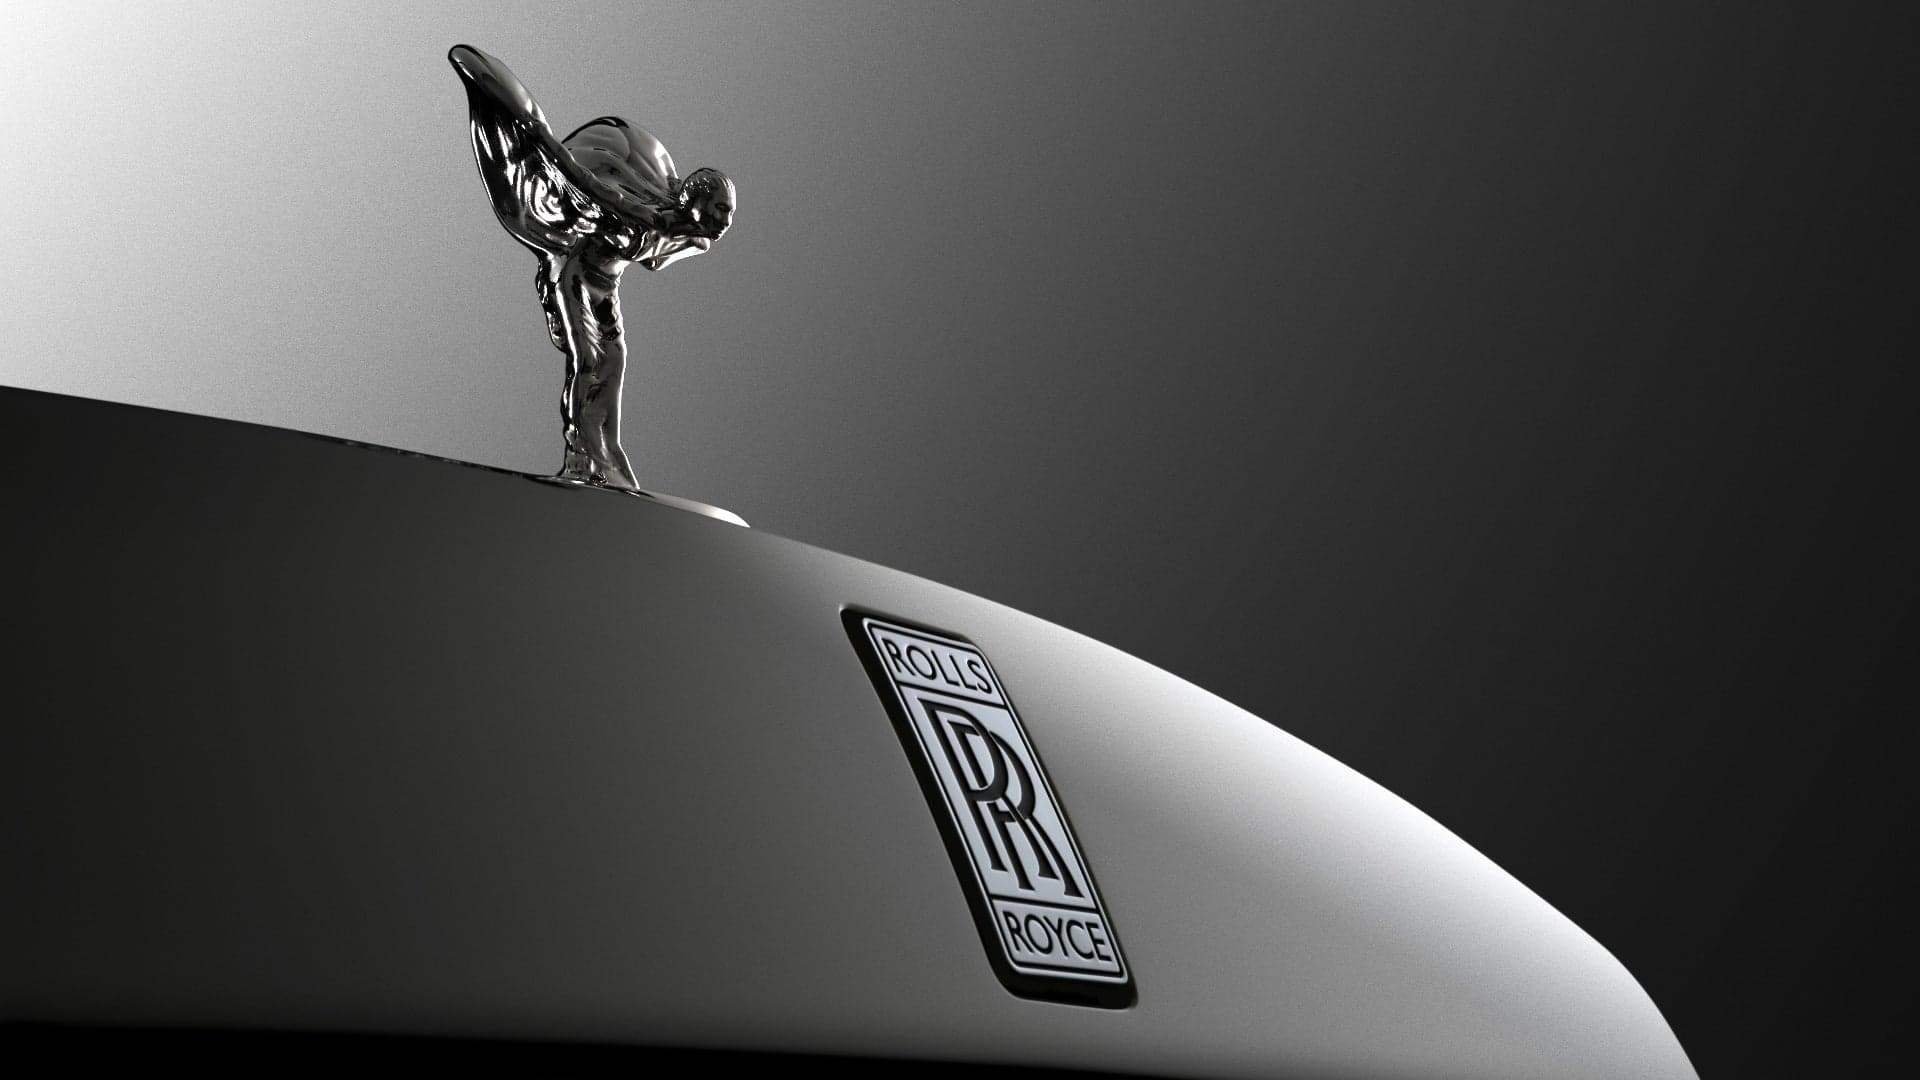 Texas Dealer Becomes First to Accept Bitcoin for Rolls-Royce Sales